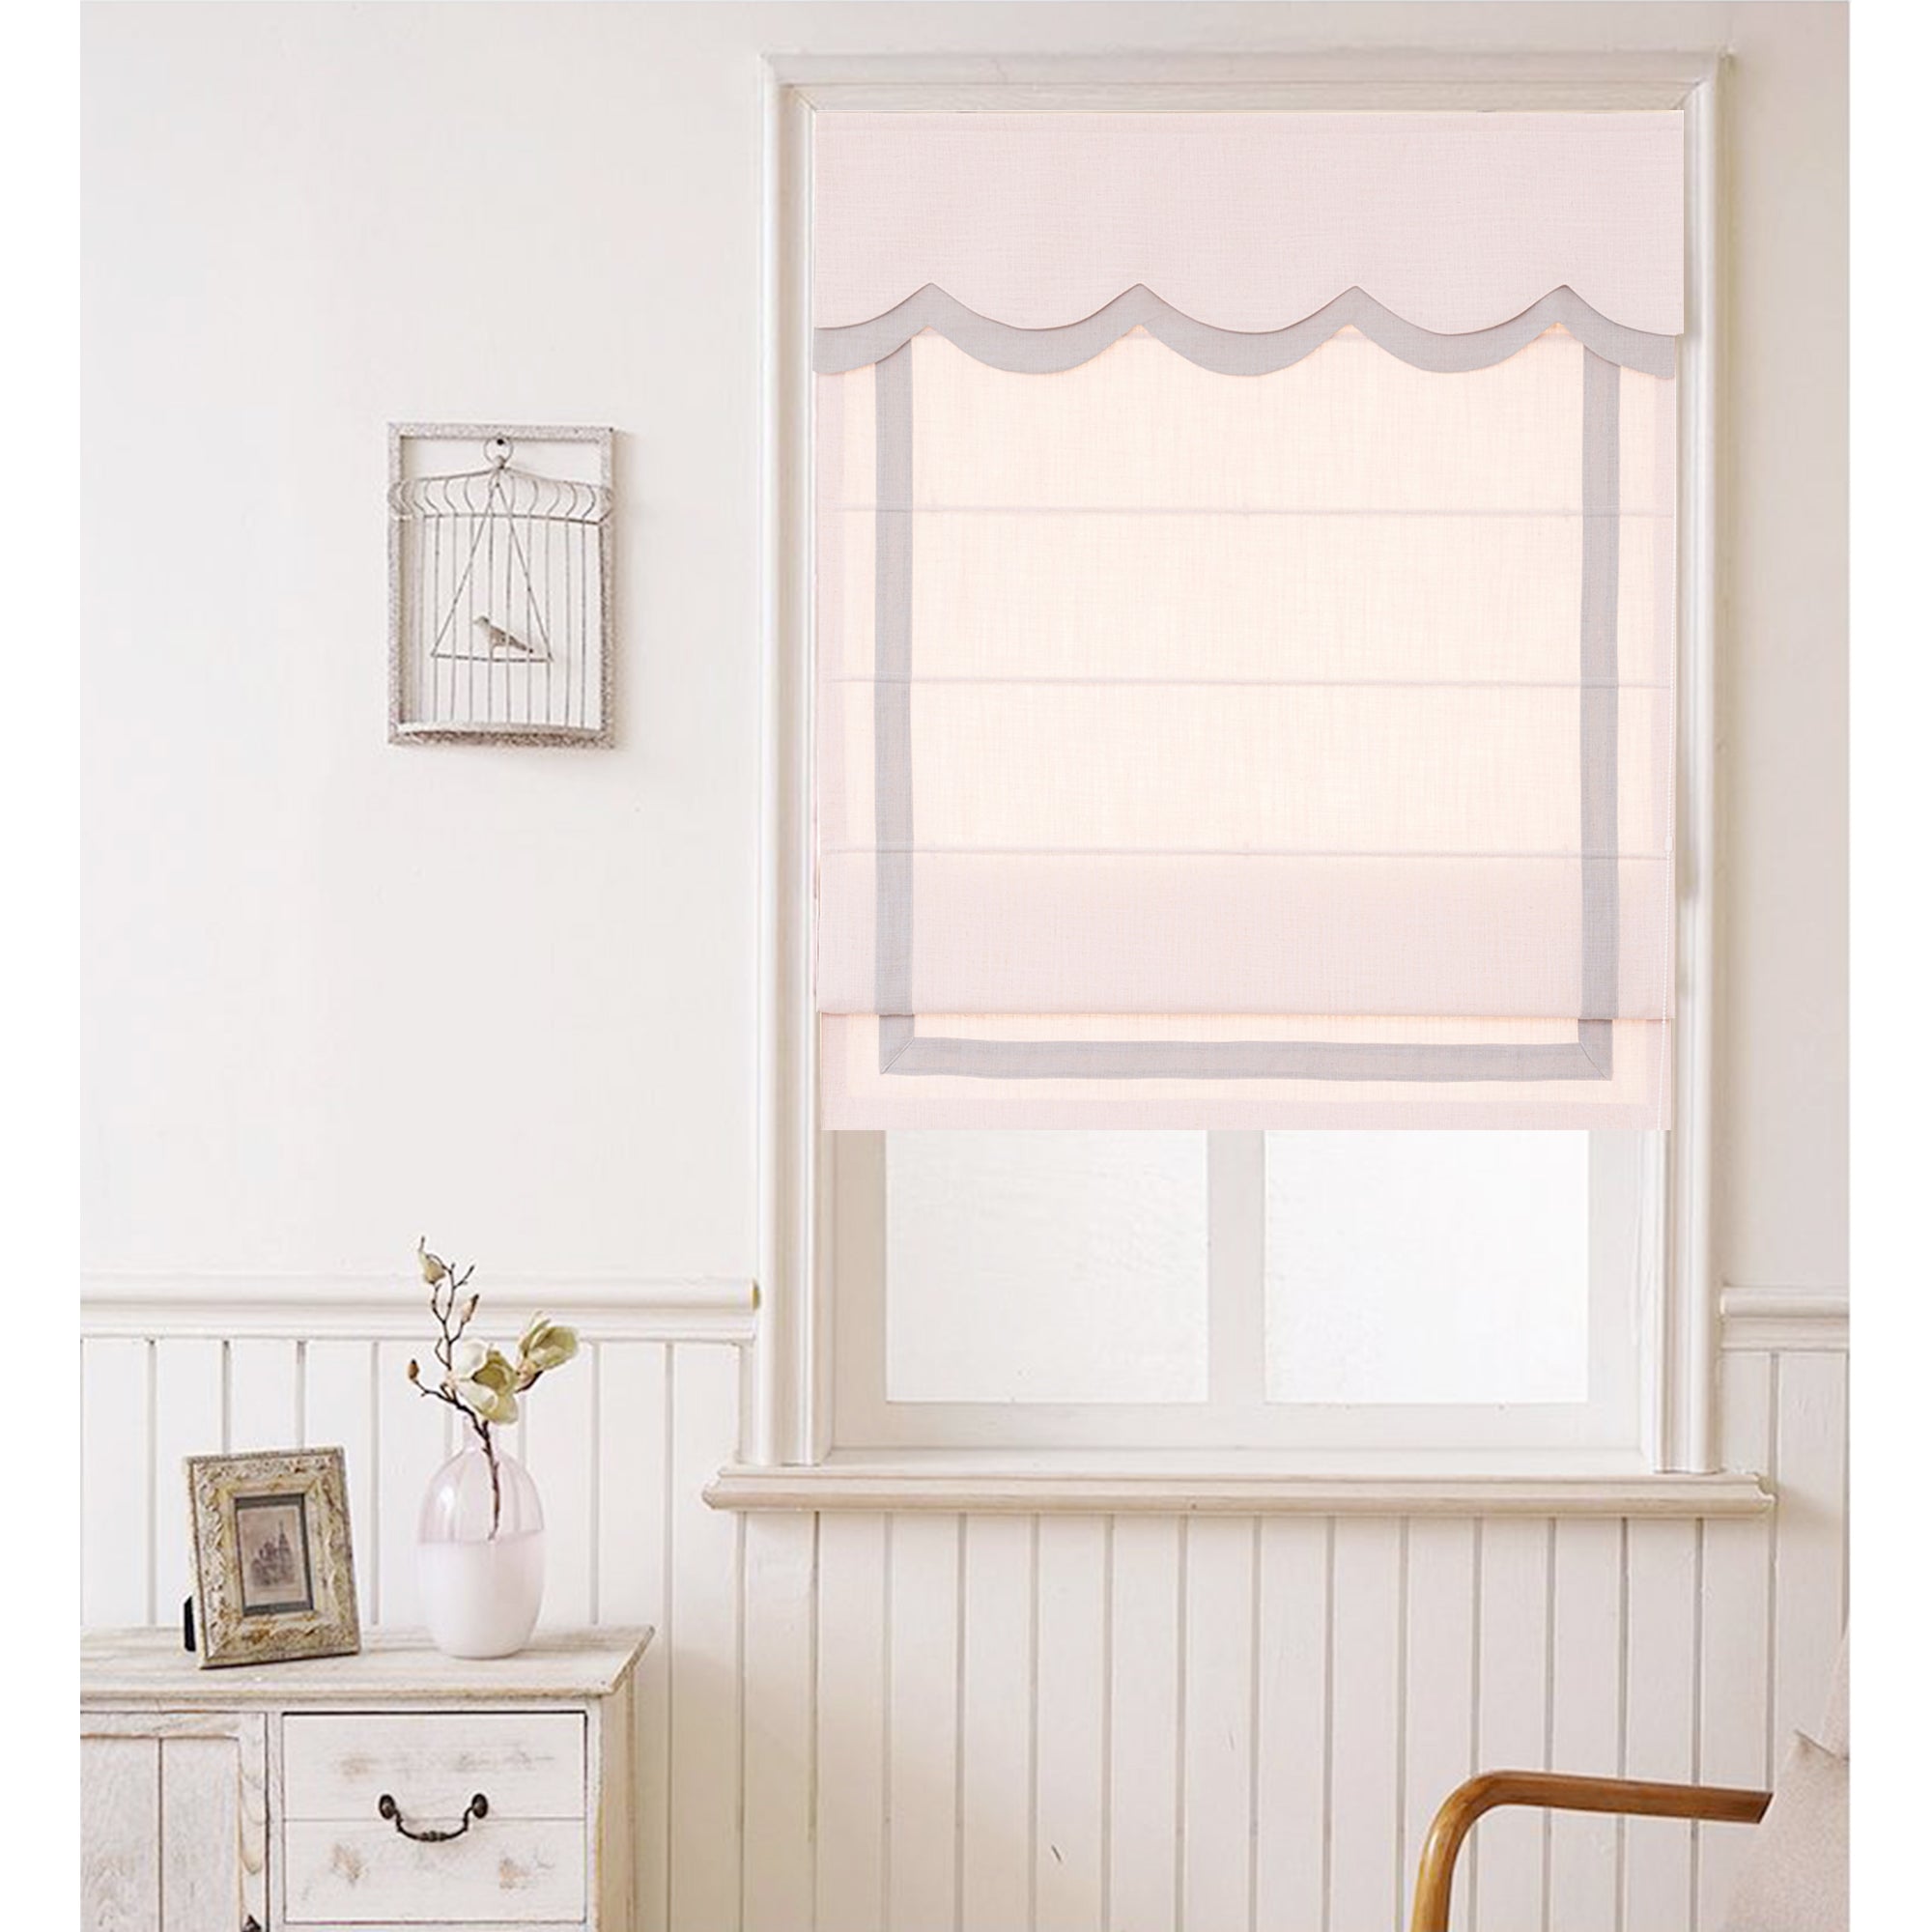 Quick Fix Washable Roman Window Shades Flat Fold with Valance, SG-004 Pink with Gray Trim